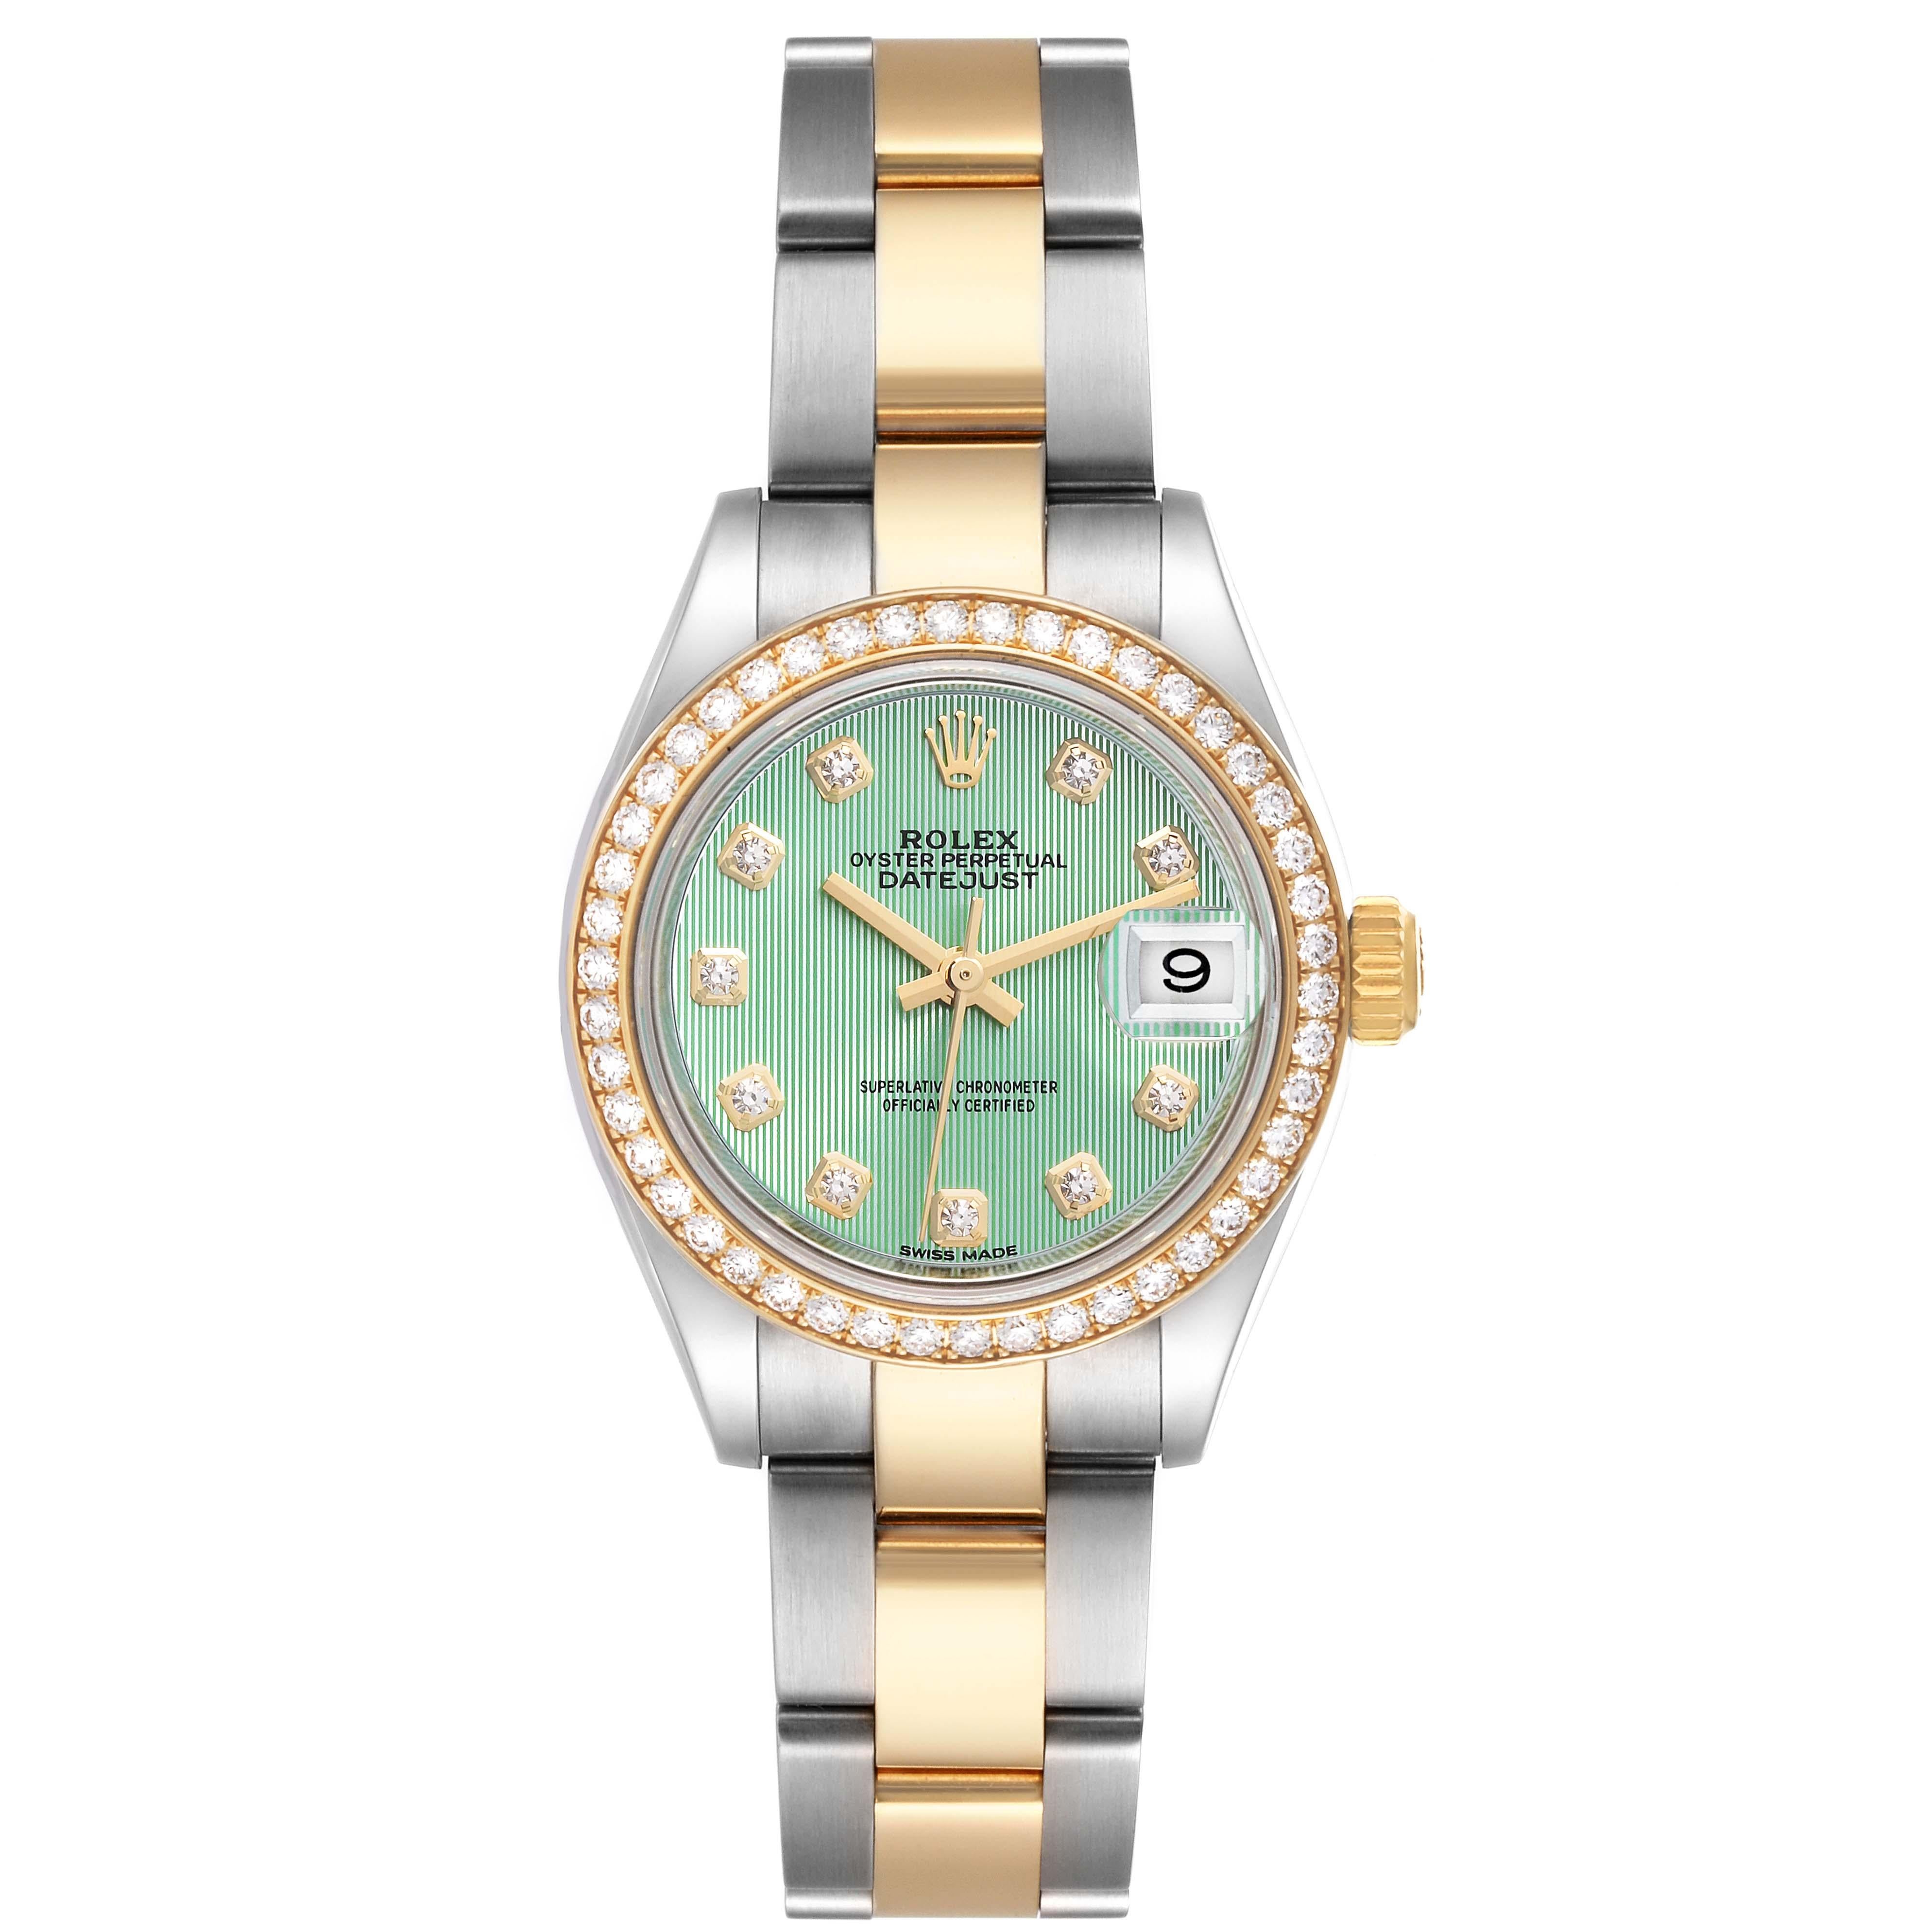 Rolex Datejust 28 Green Stripe Steel Yellow Gold Diamond Ladies Watch 279383. Officially certified chronometer automatic self-winding movement. Stainless steel oyster case 28.0 mm in diameter. Rolex logo on an 18K yellow gold crown. 18k yellow gold